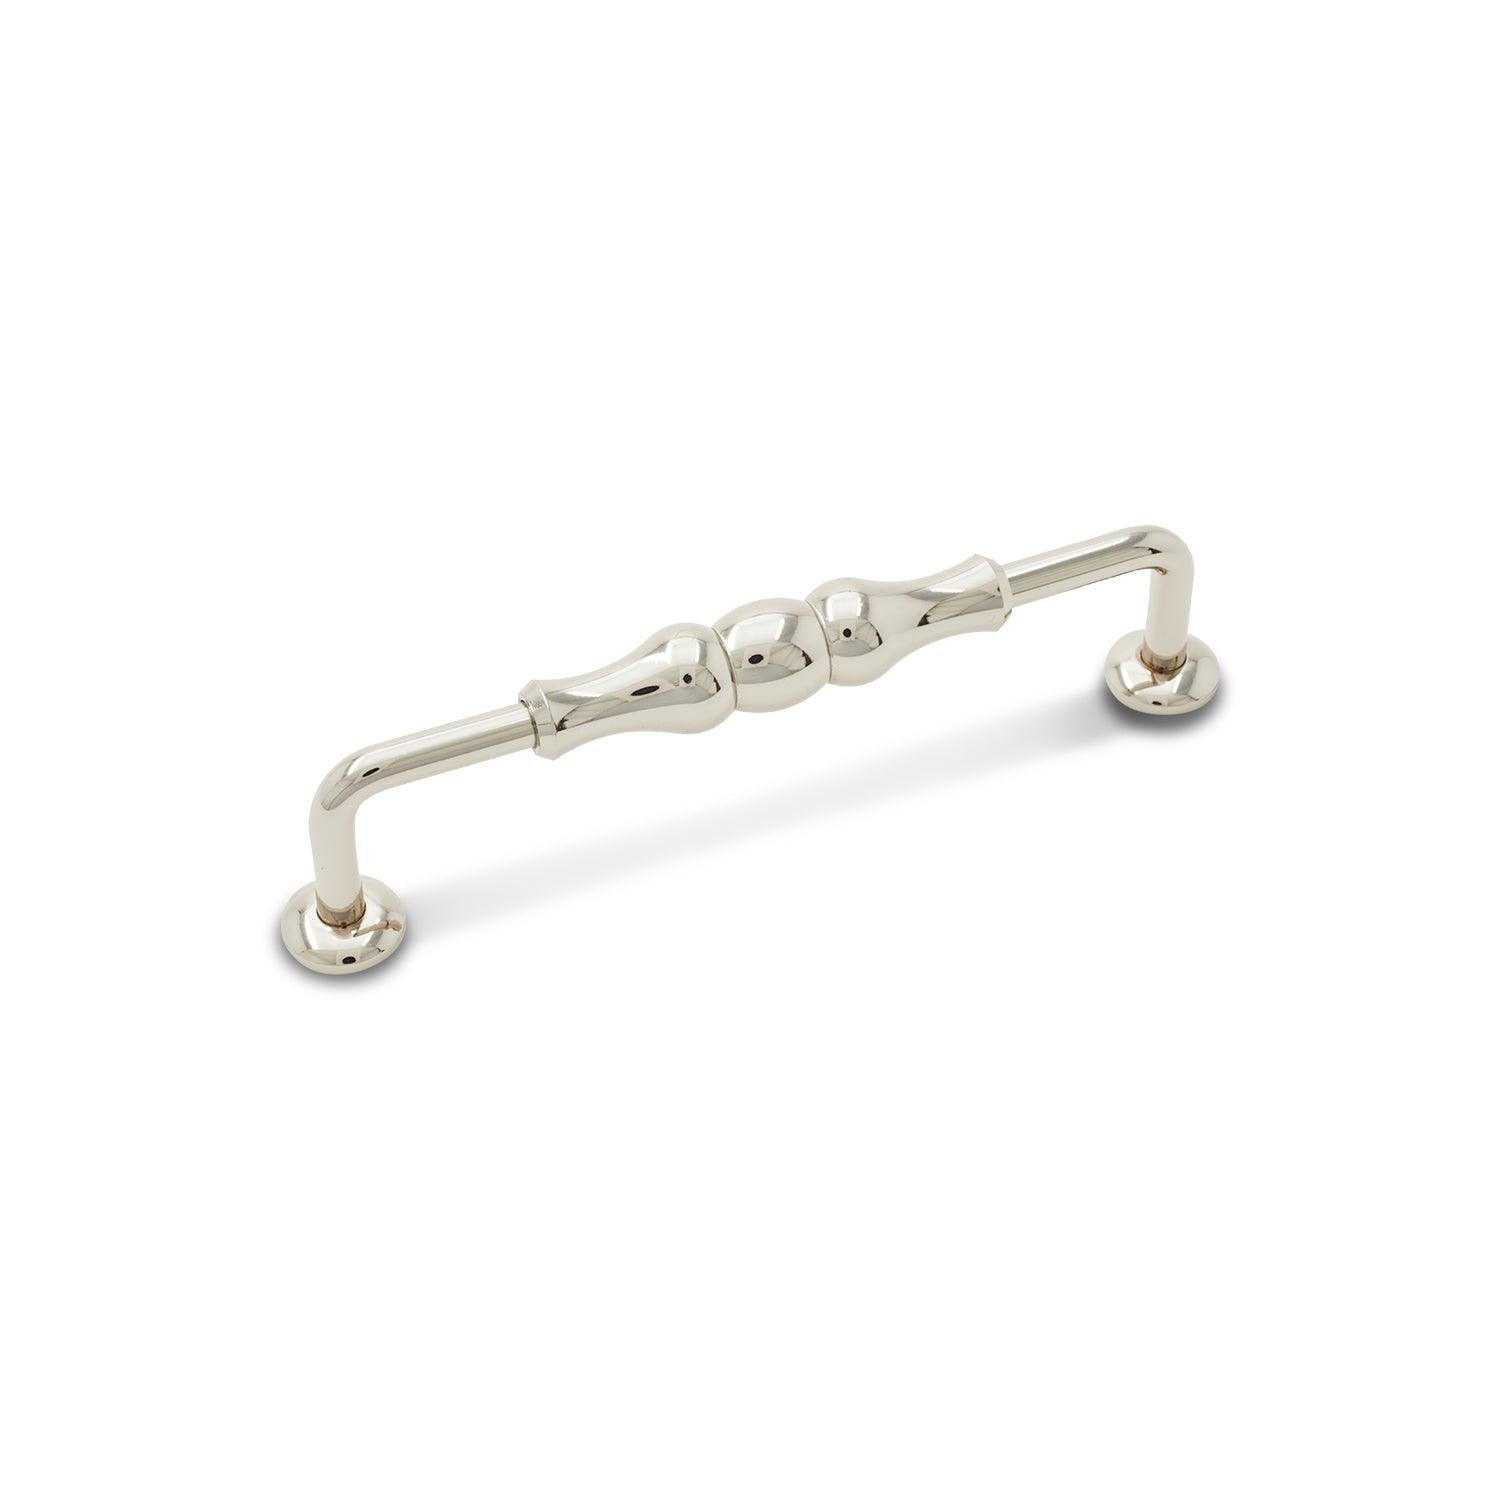 RKI - Beaded Middle Collection - Vertical Cabinet Pull - APex Hardware NY 